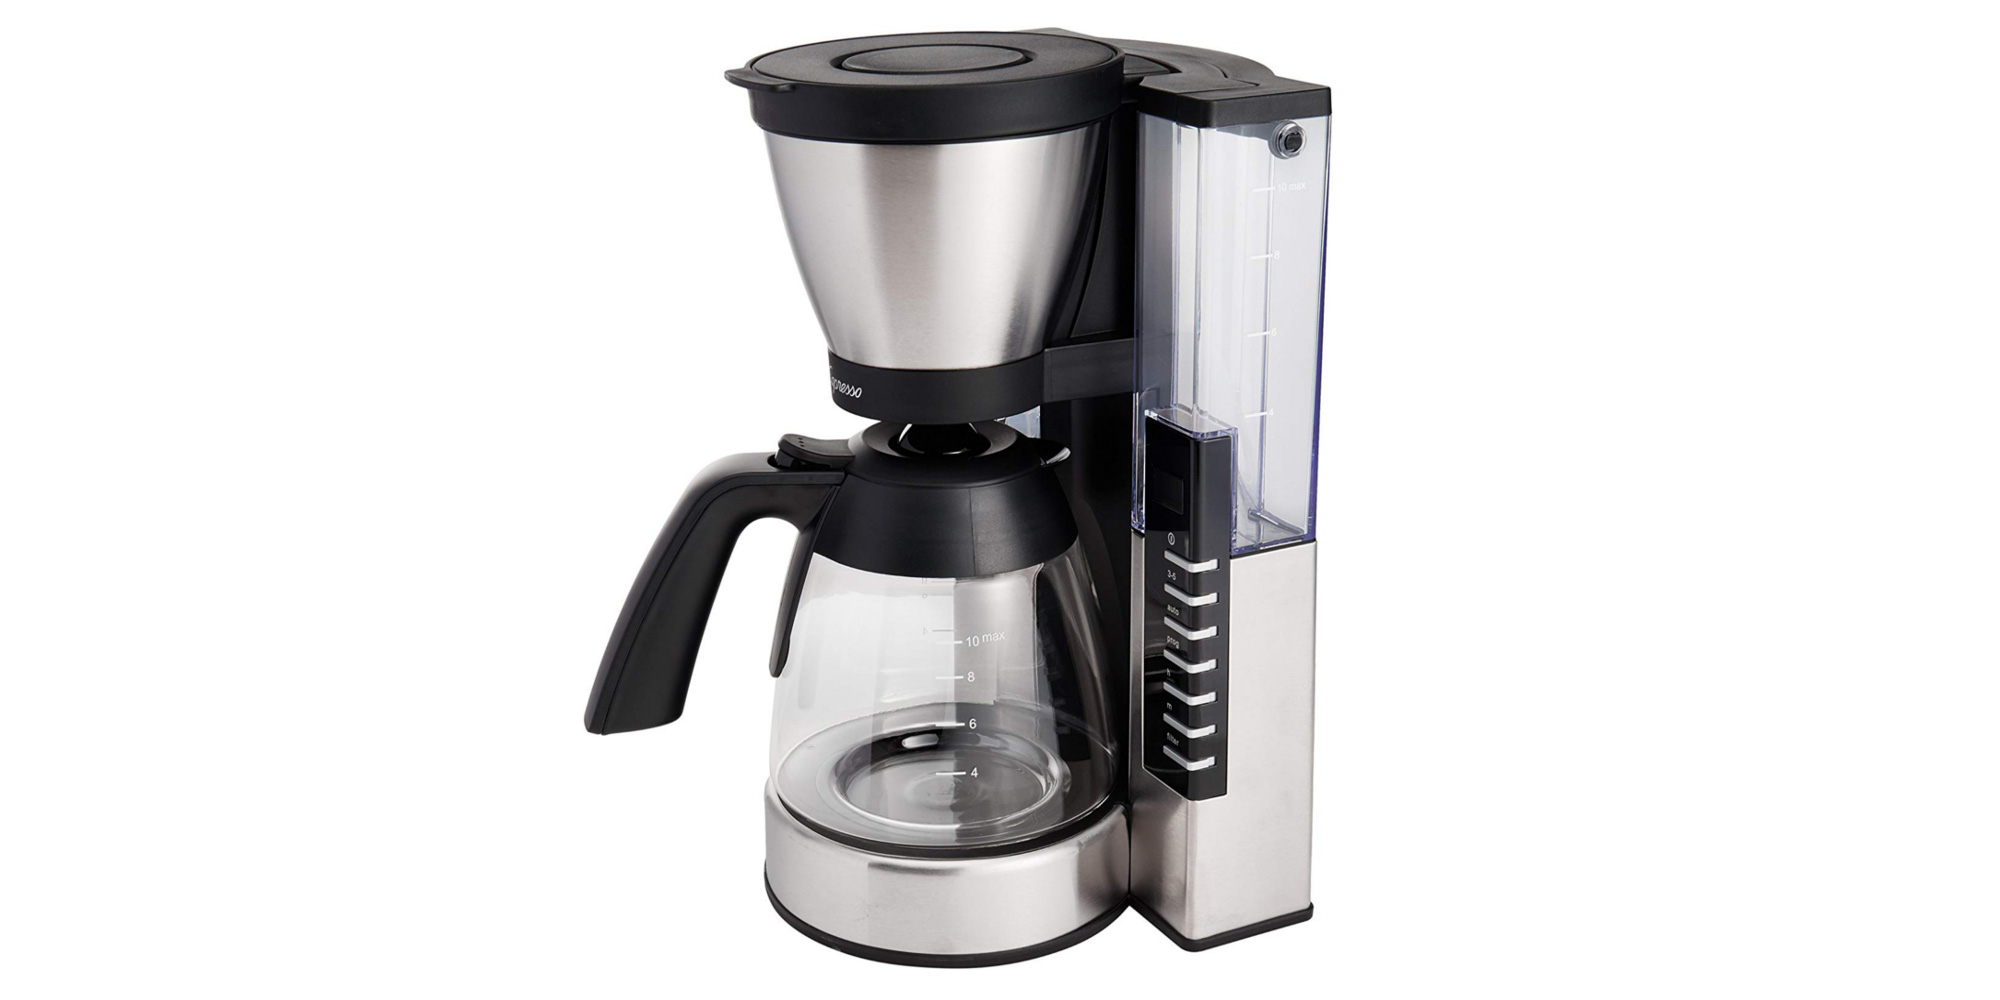 MG900 10-Cup Rapid Brew